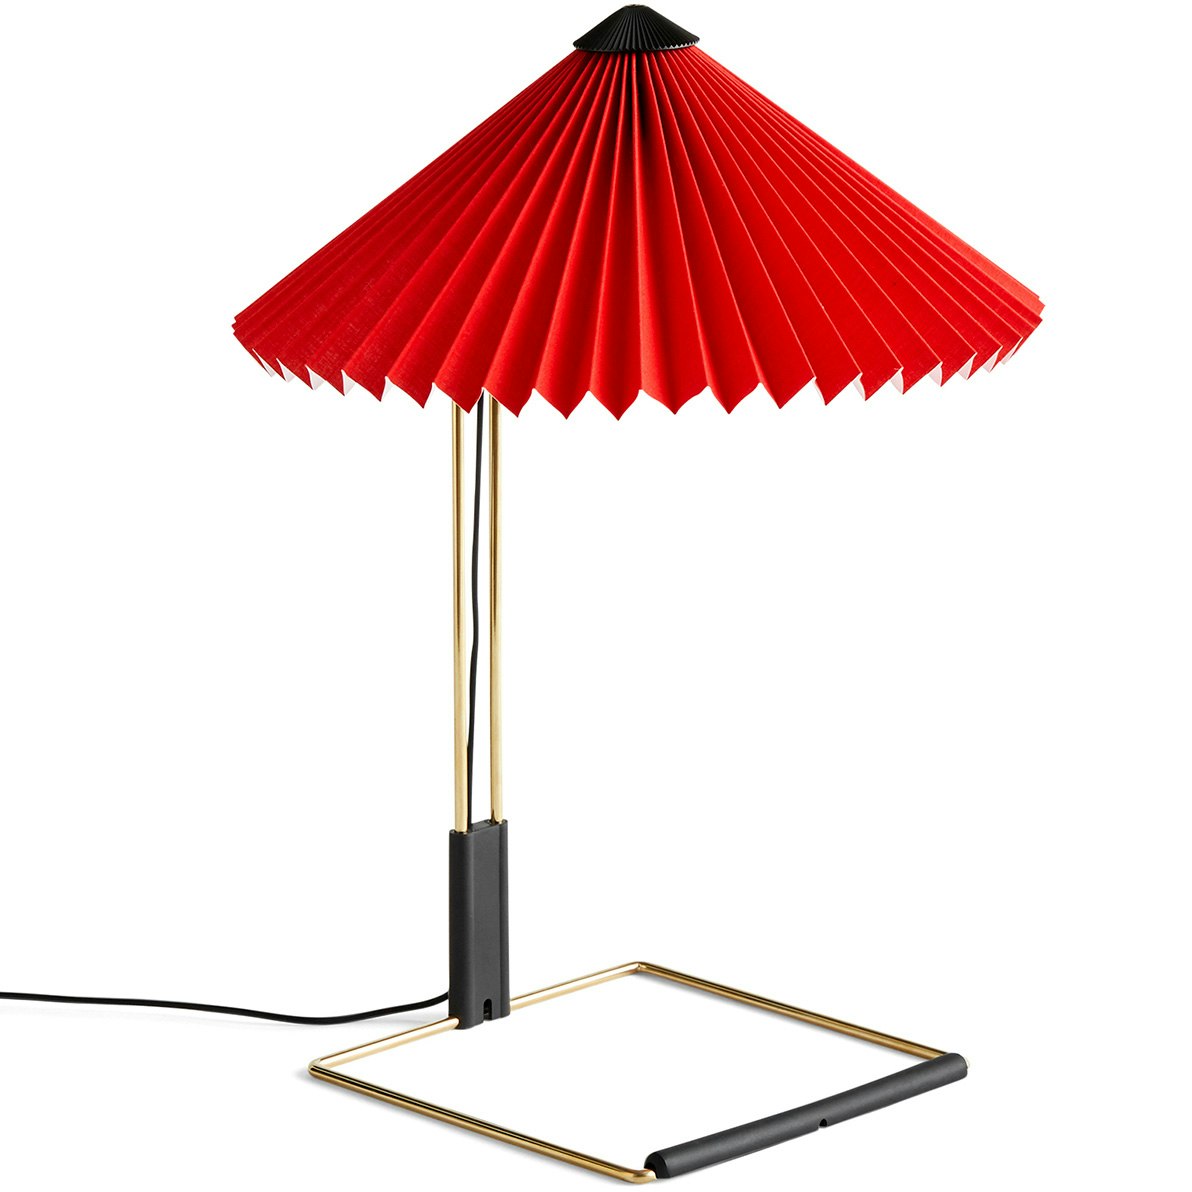 Matin Table Lamp 300 mm, Polished Brass / Bright Red